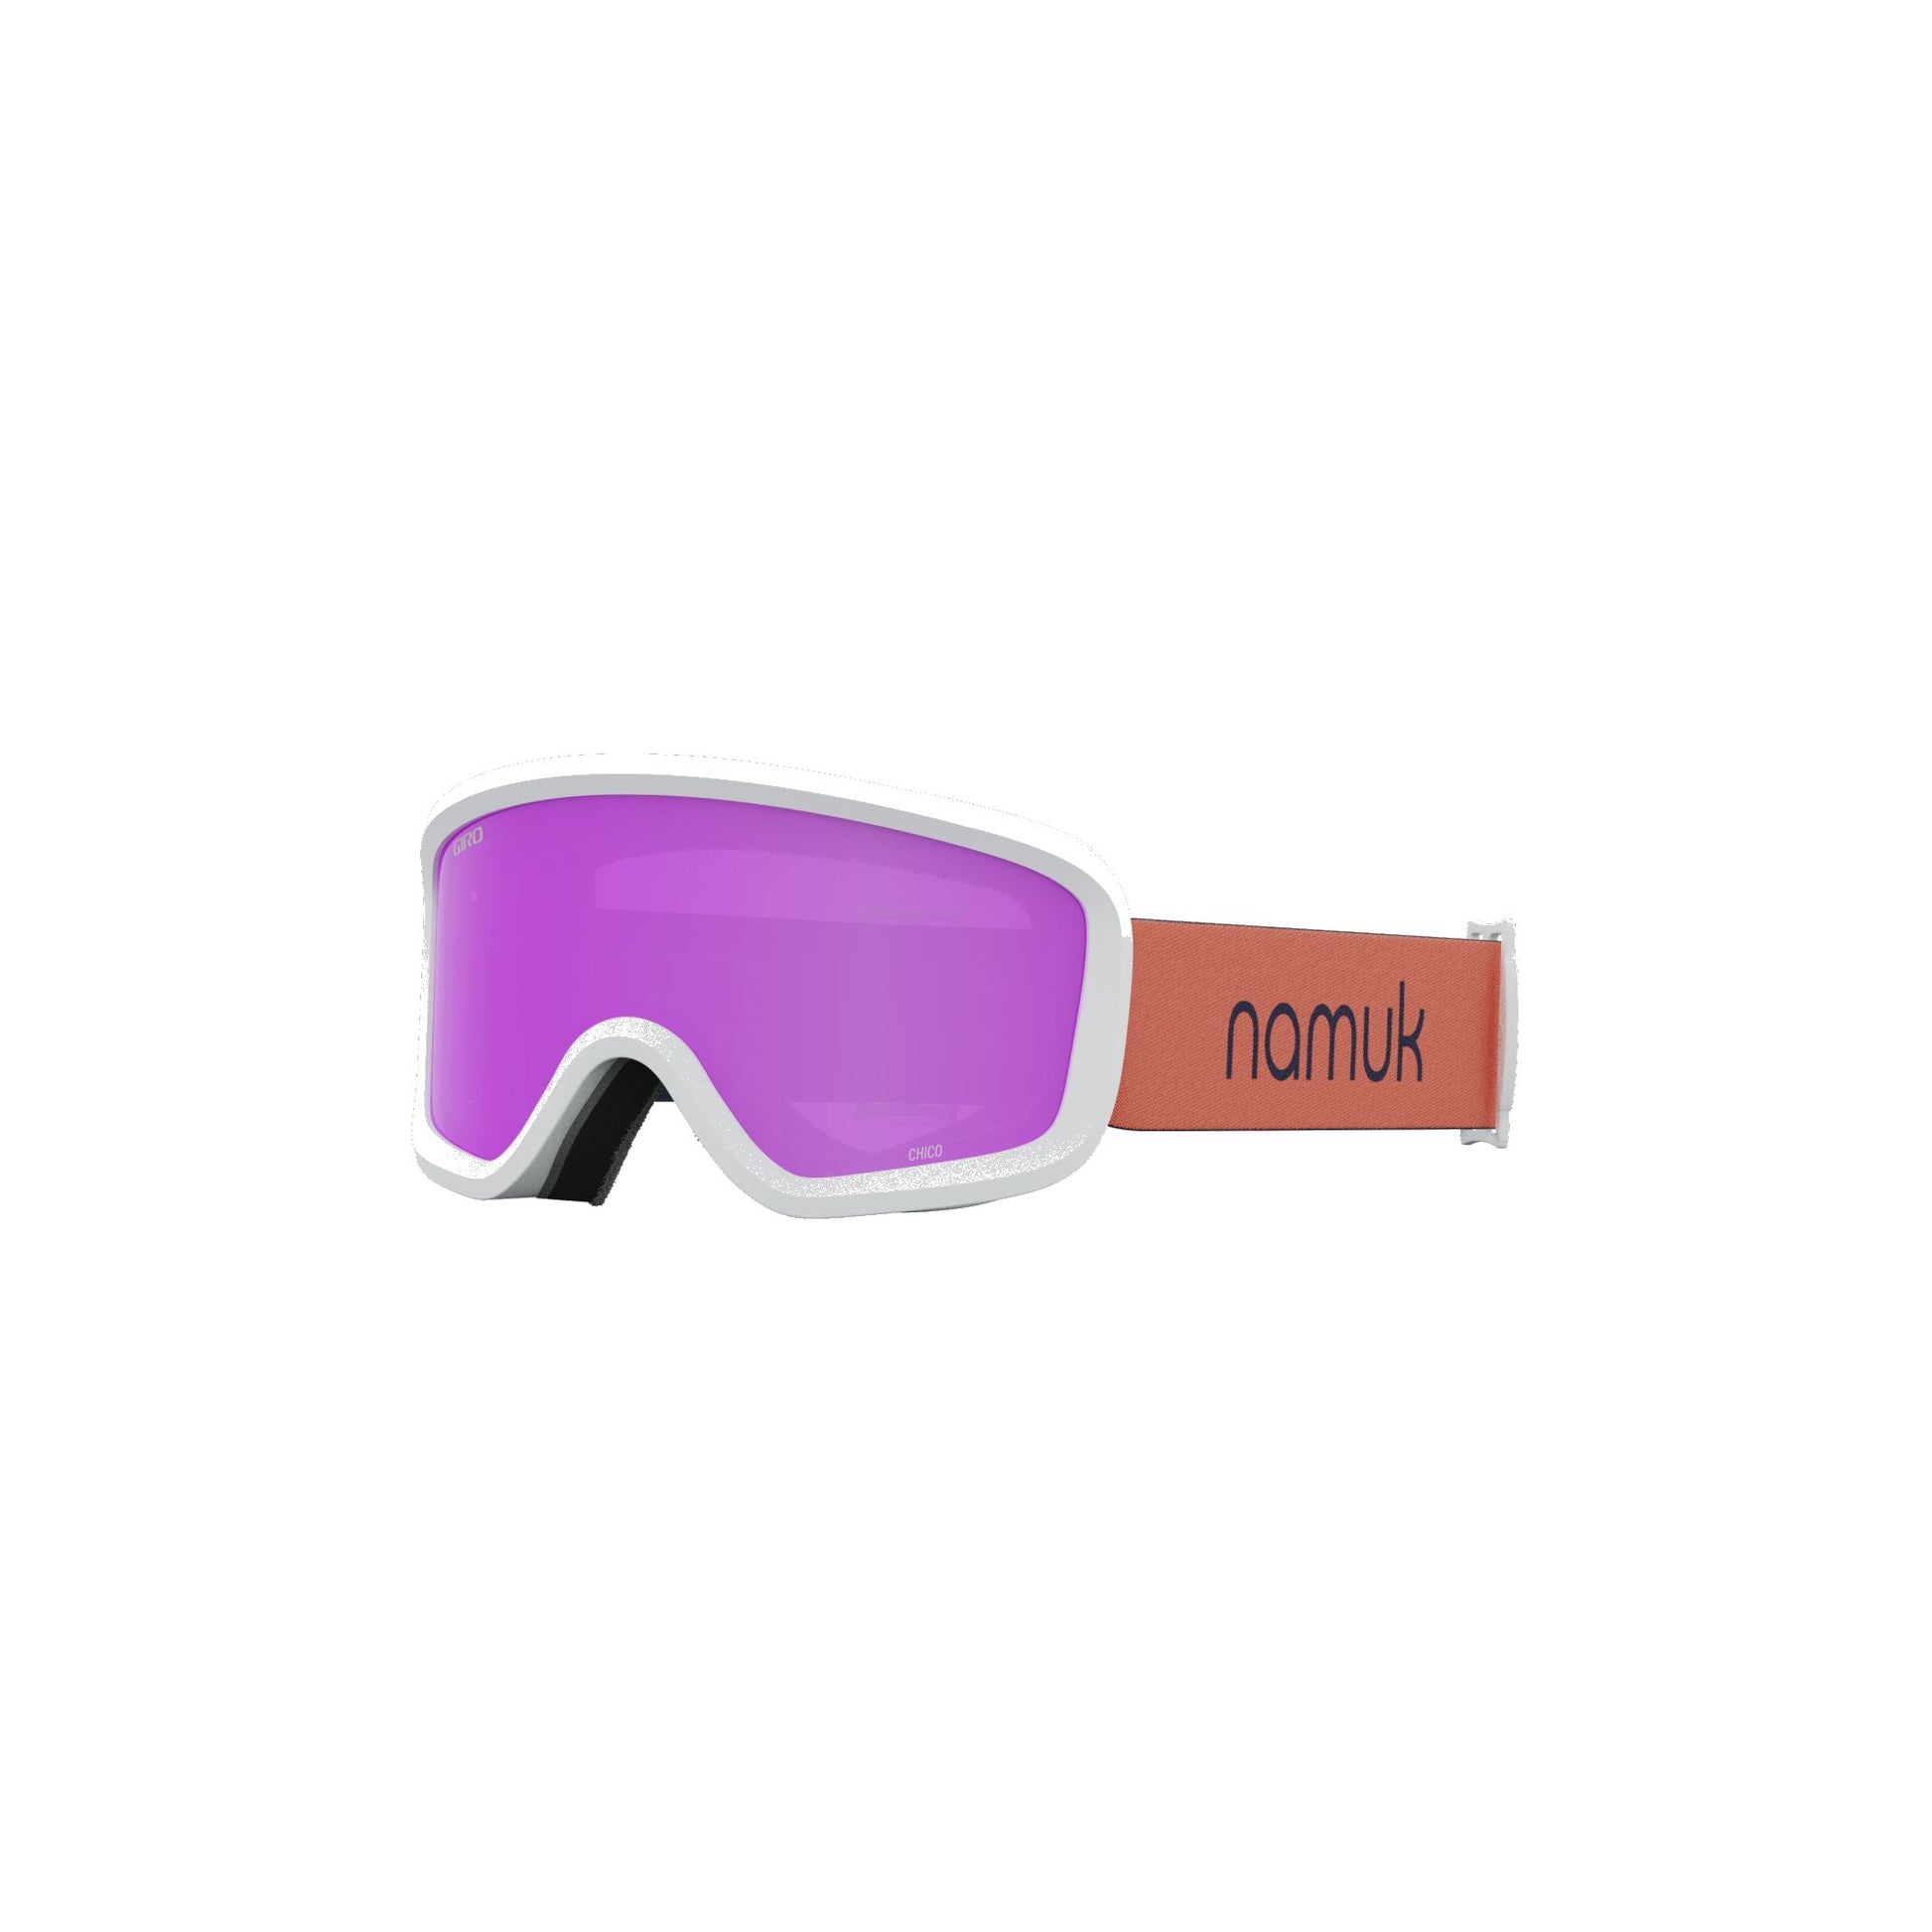 Giro Youth Chico 2.0 Snow Goggles Namuk Coral True Navy Amber Pink Snow Goggles